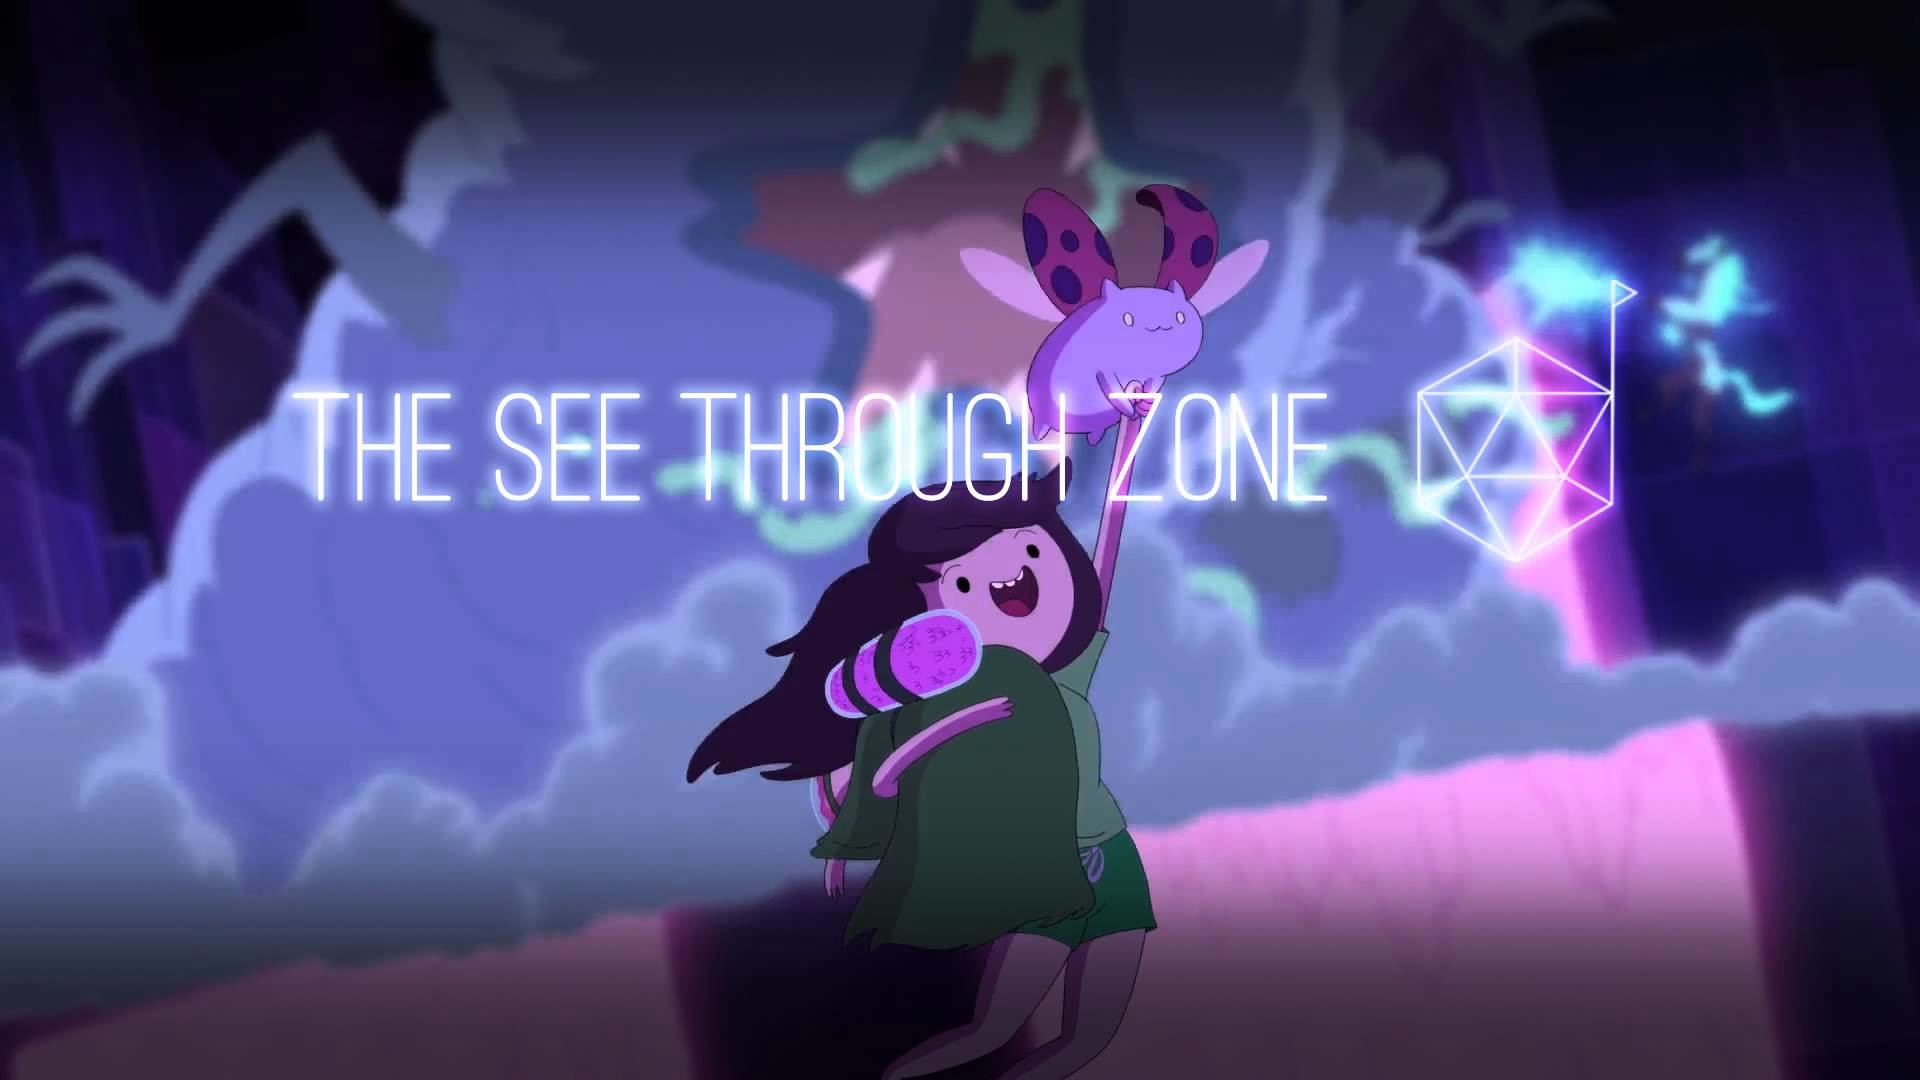 1920x1080 The See Through Zone | Tribute to Horse | Bravest Warriors Contest